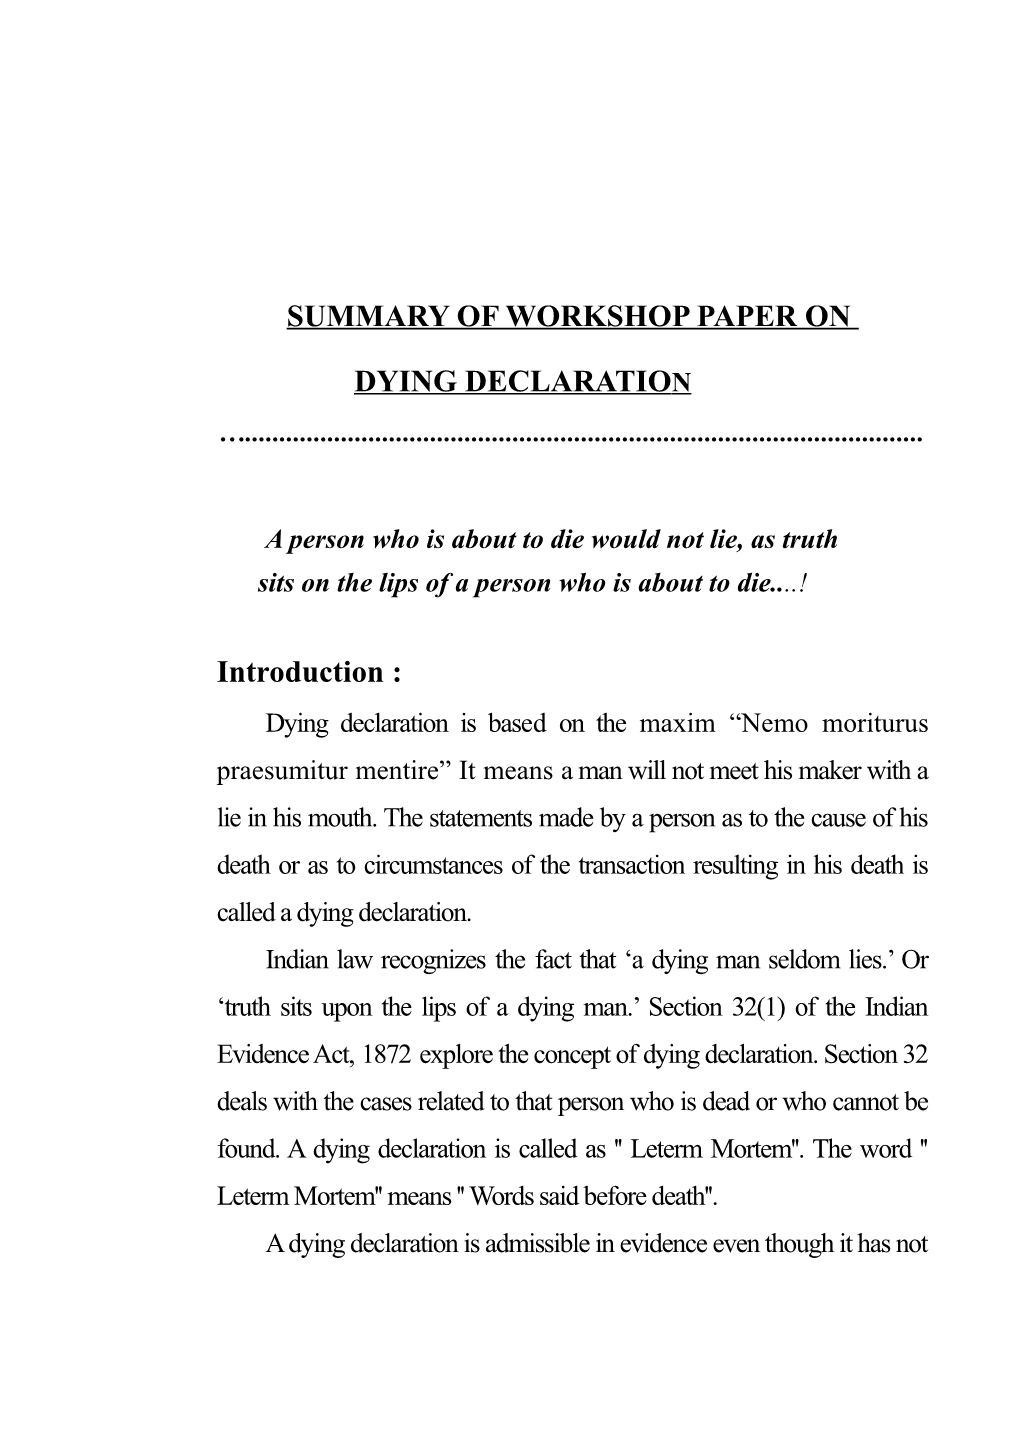 Summary of Workshop Paper on Dying Declaration